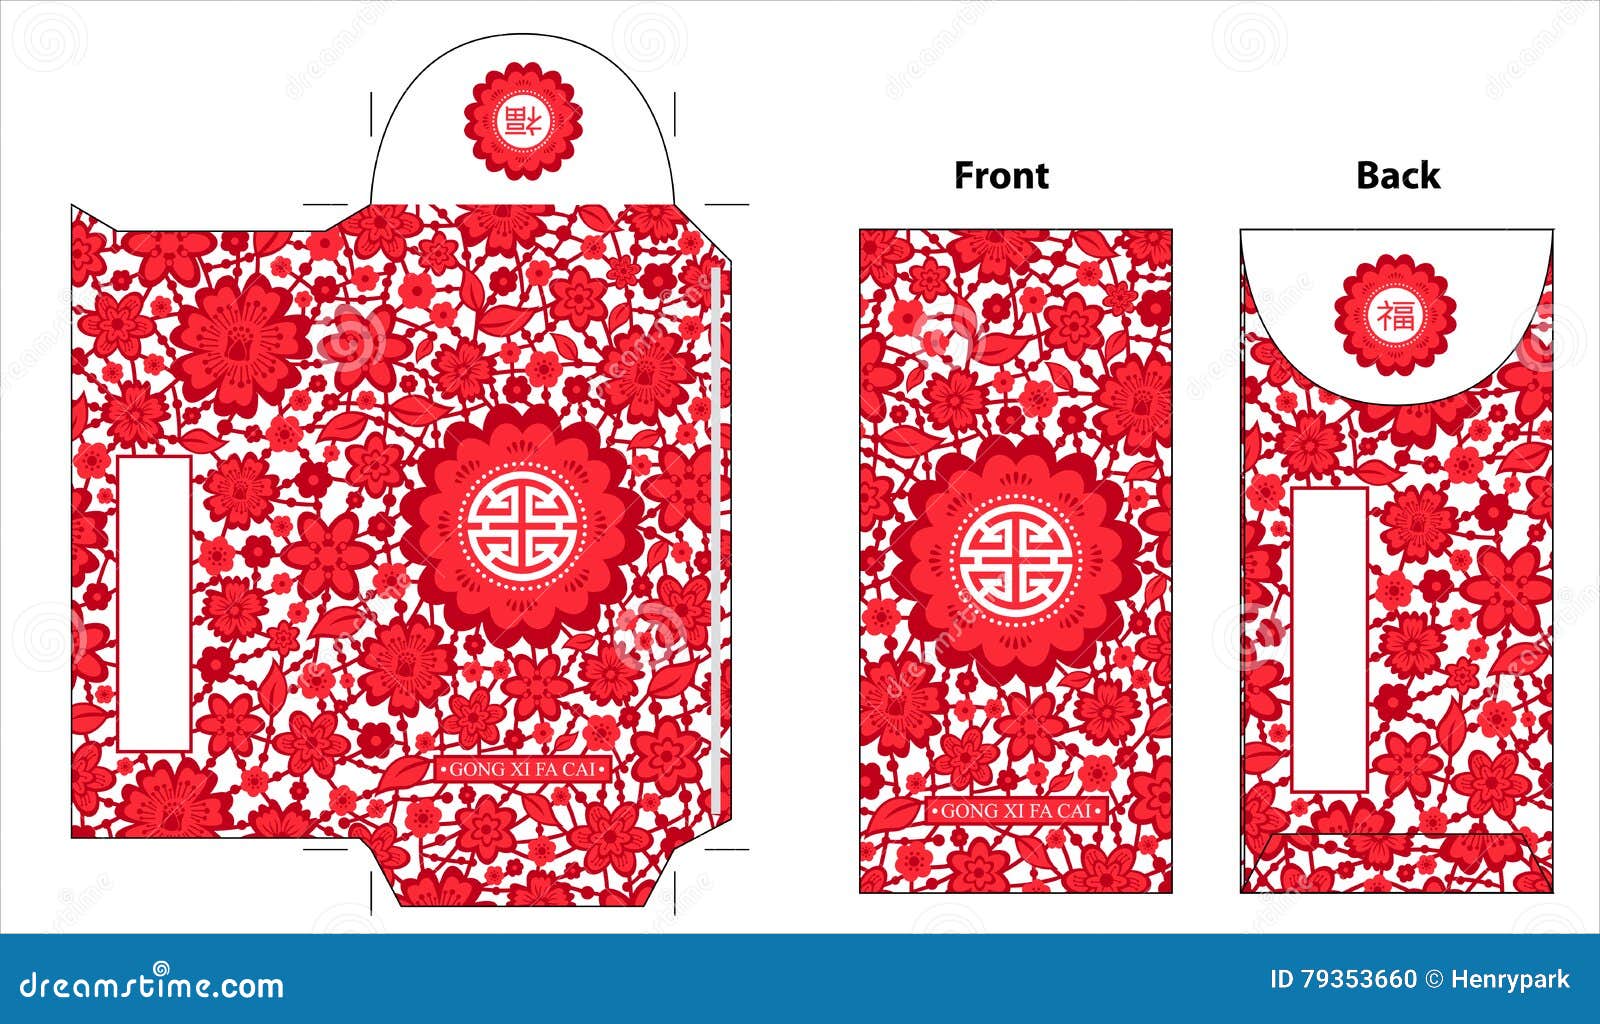 Red Envelope Template from thumbs.dreamstime.com